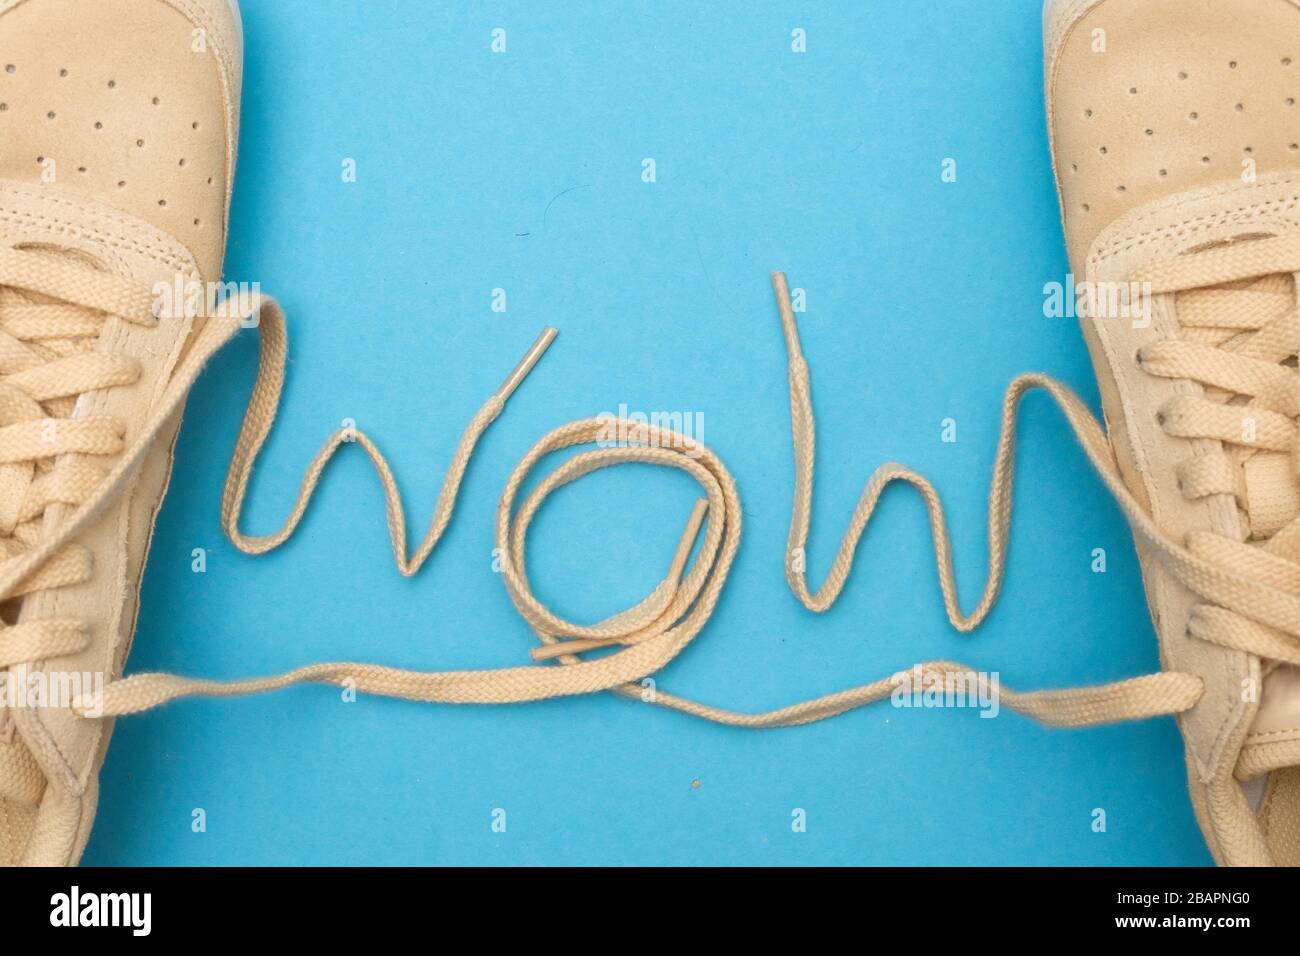 The word Wow made from laces of shoes on blue wall Stock Photo - Alamy